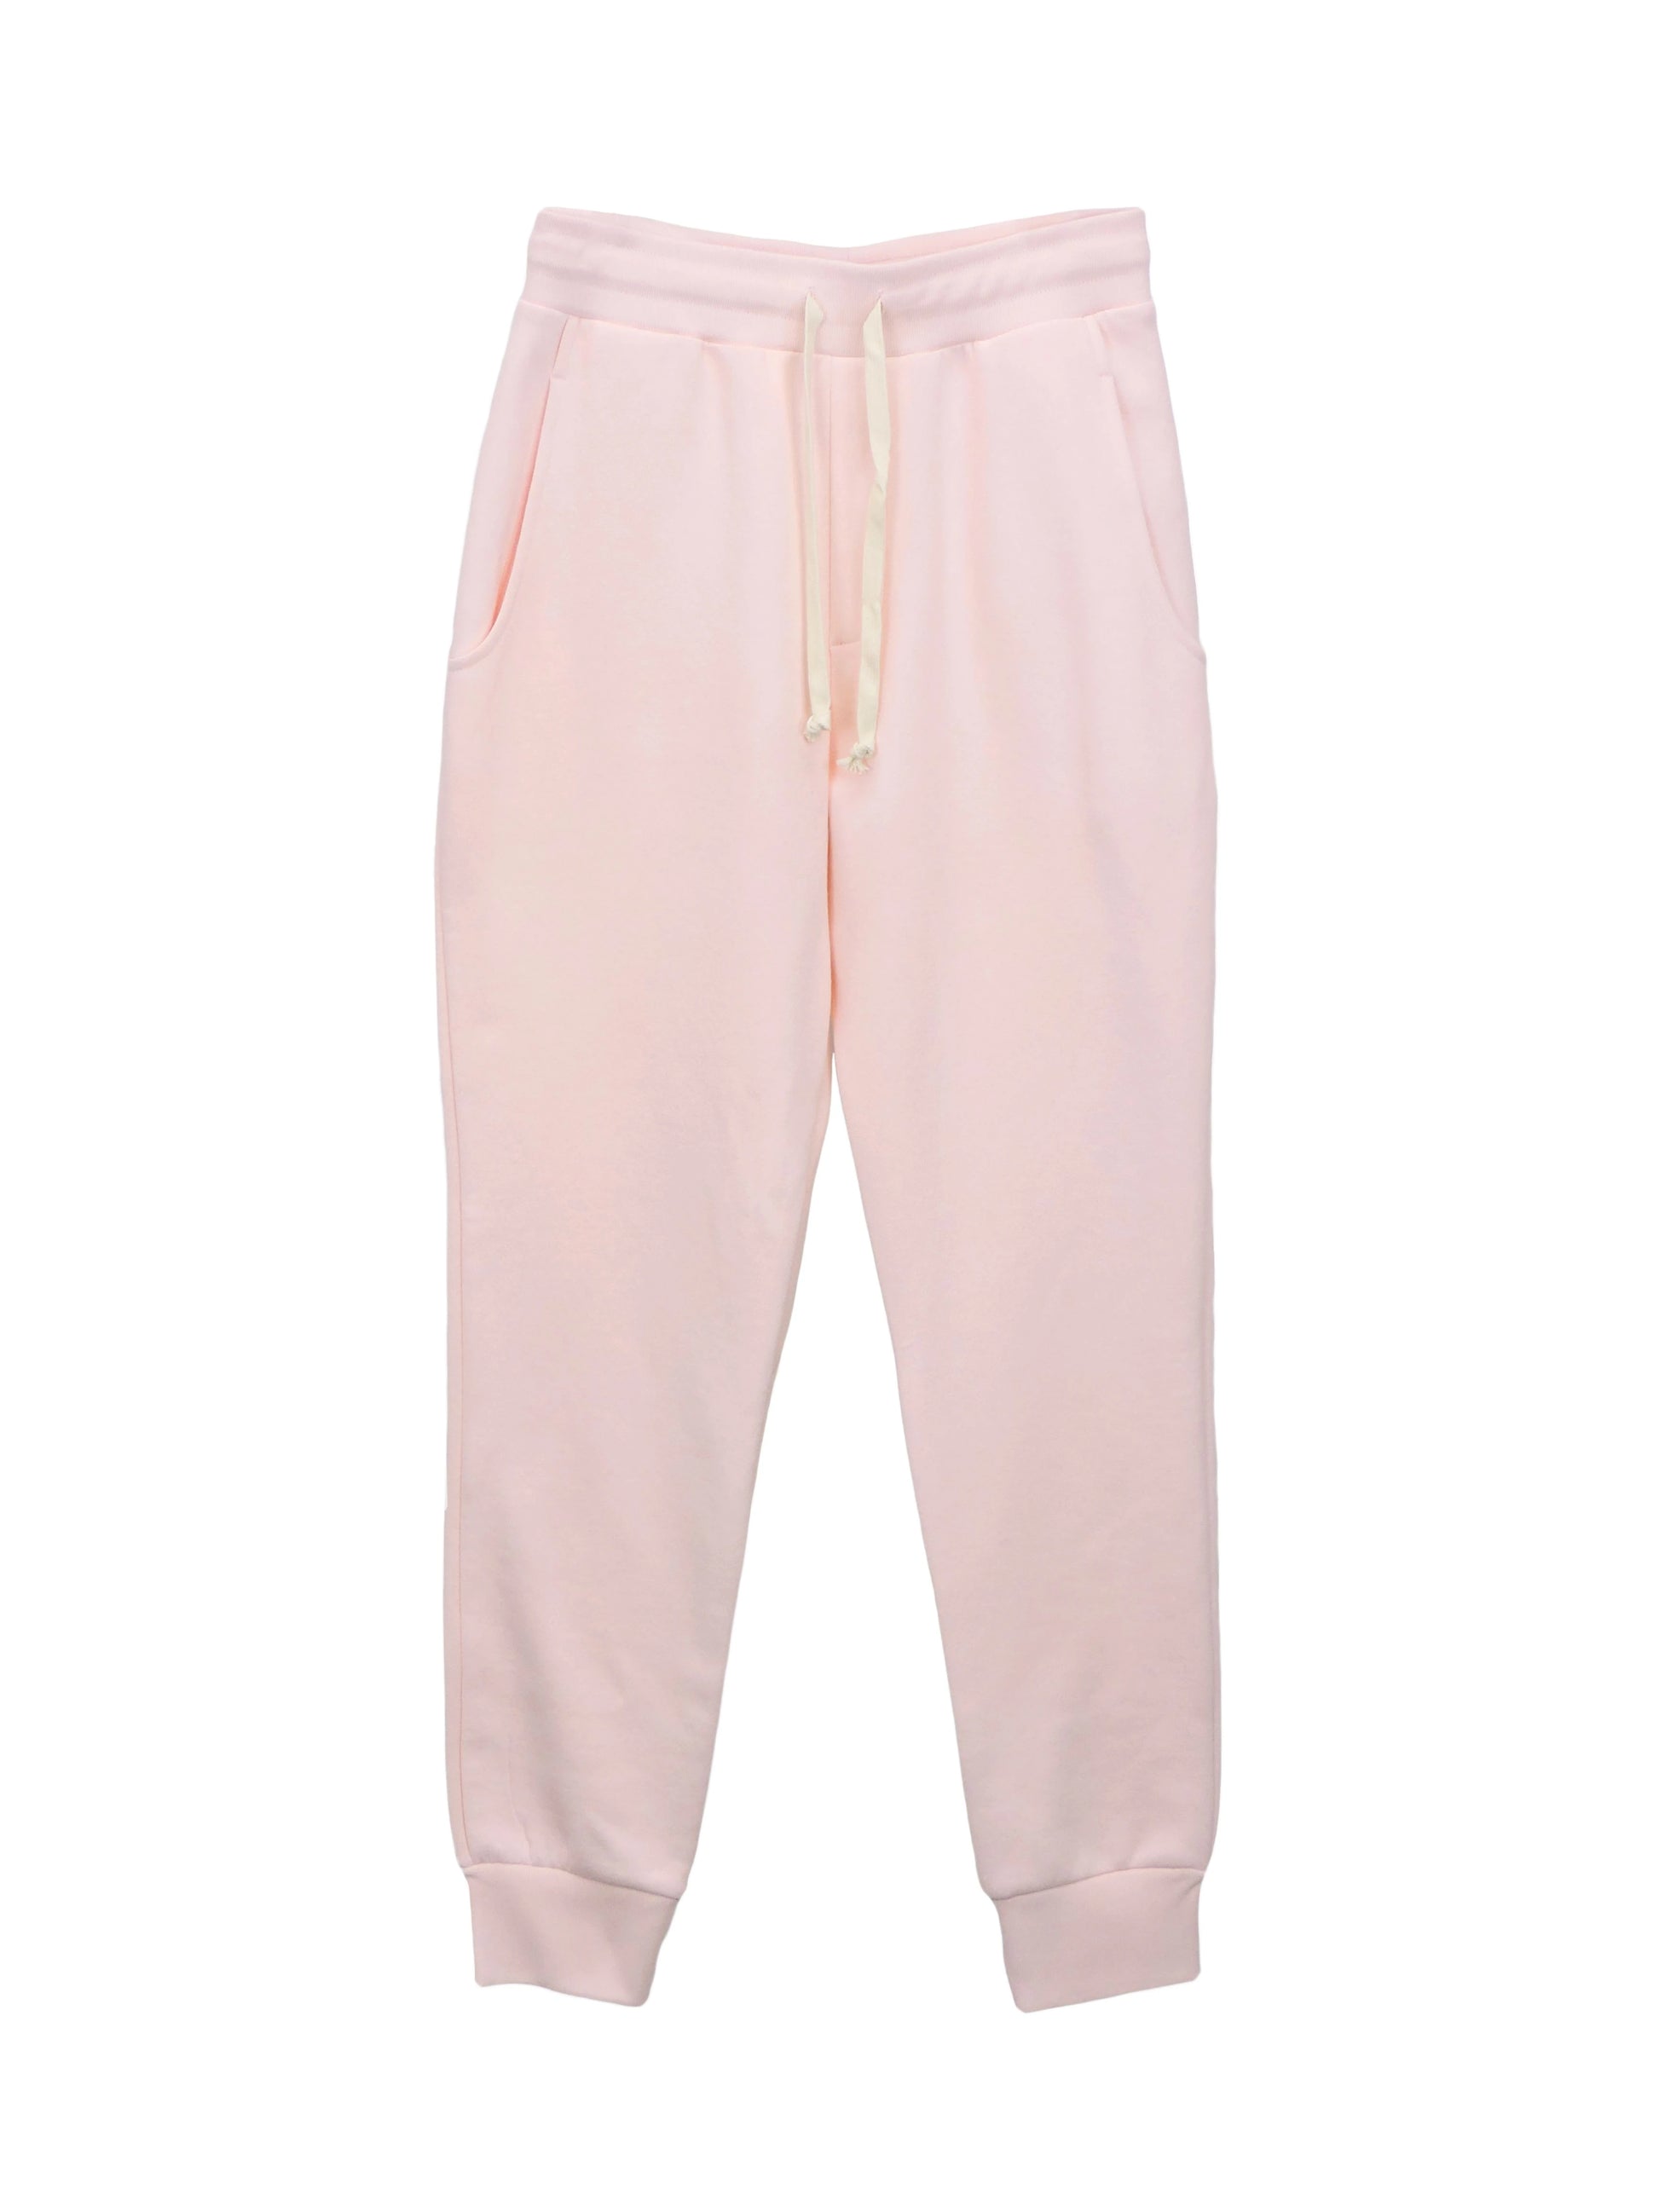 Pale Pink Fleece Jogger with White Drawstrings